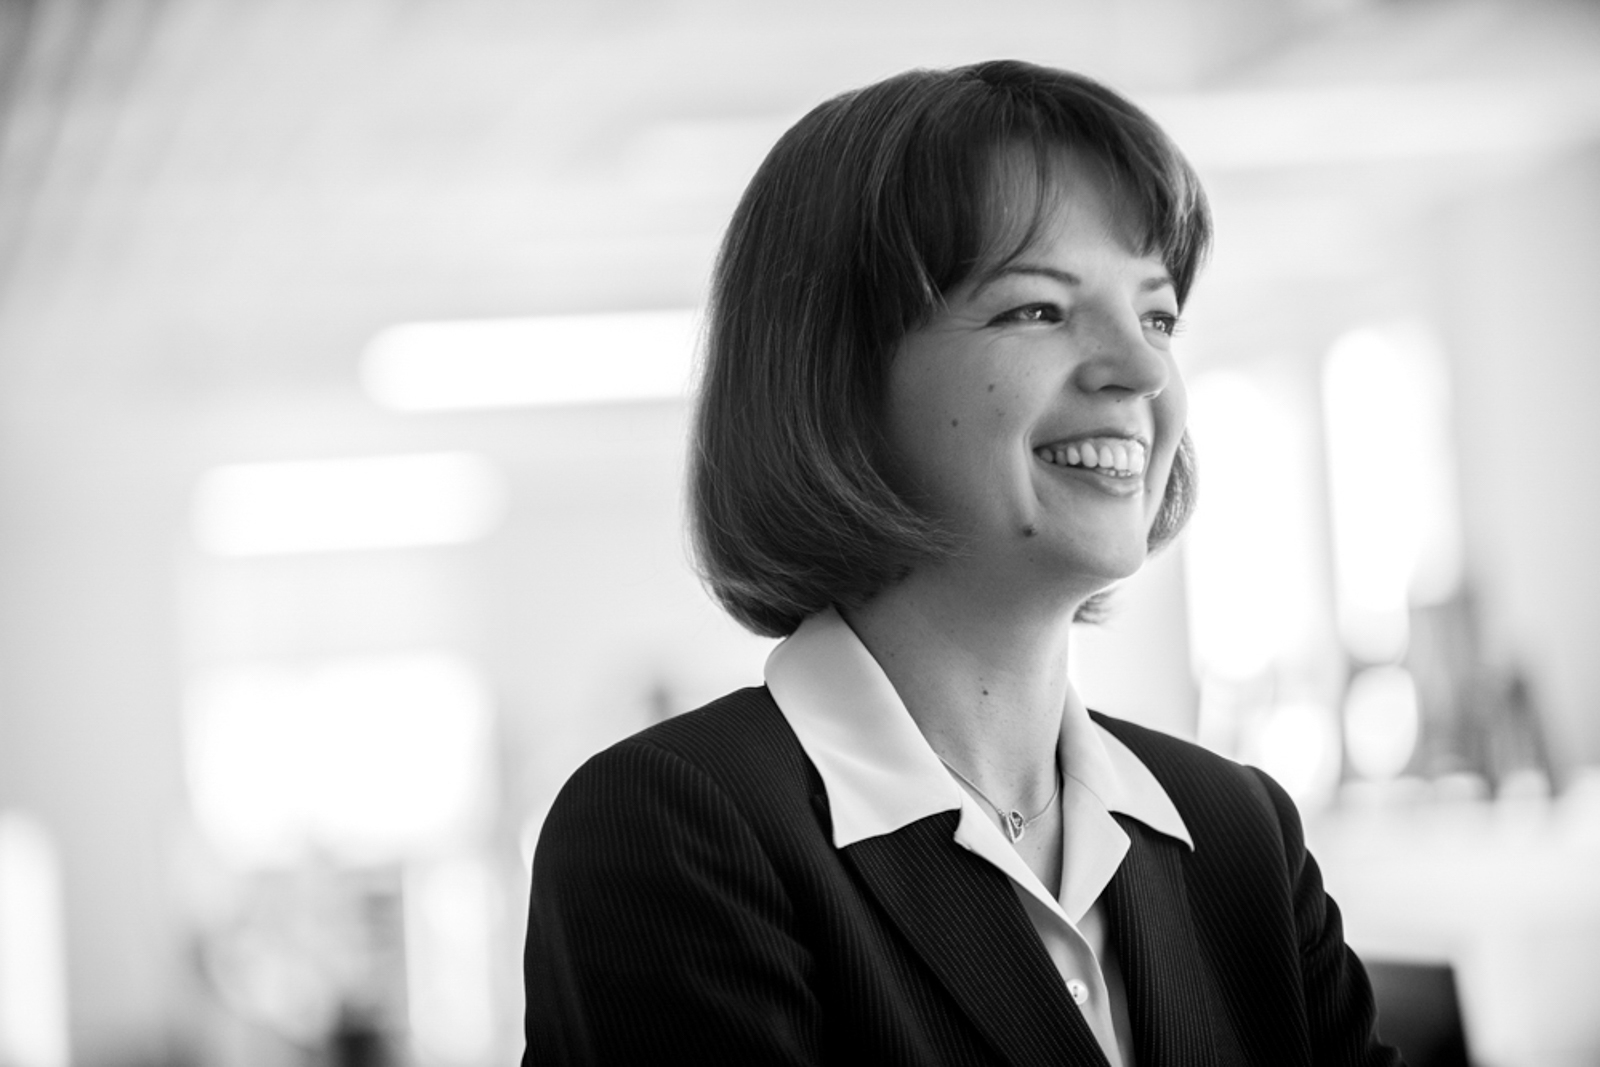 Black and White portrait of business woman smiling confidently